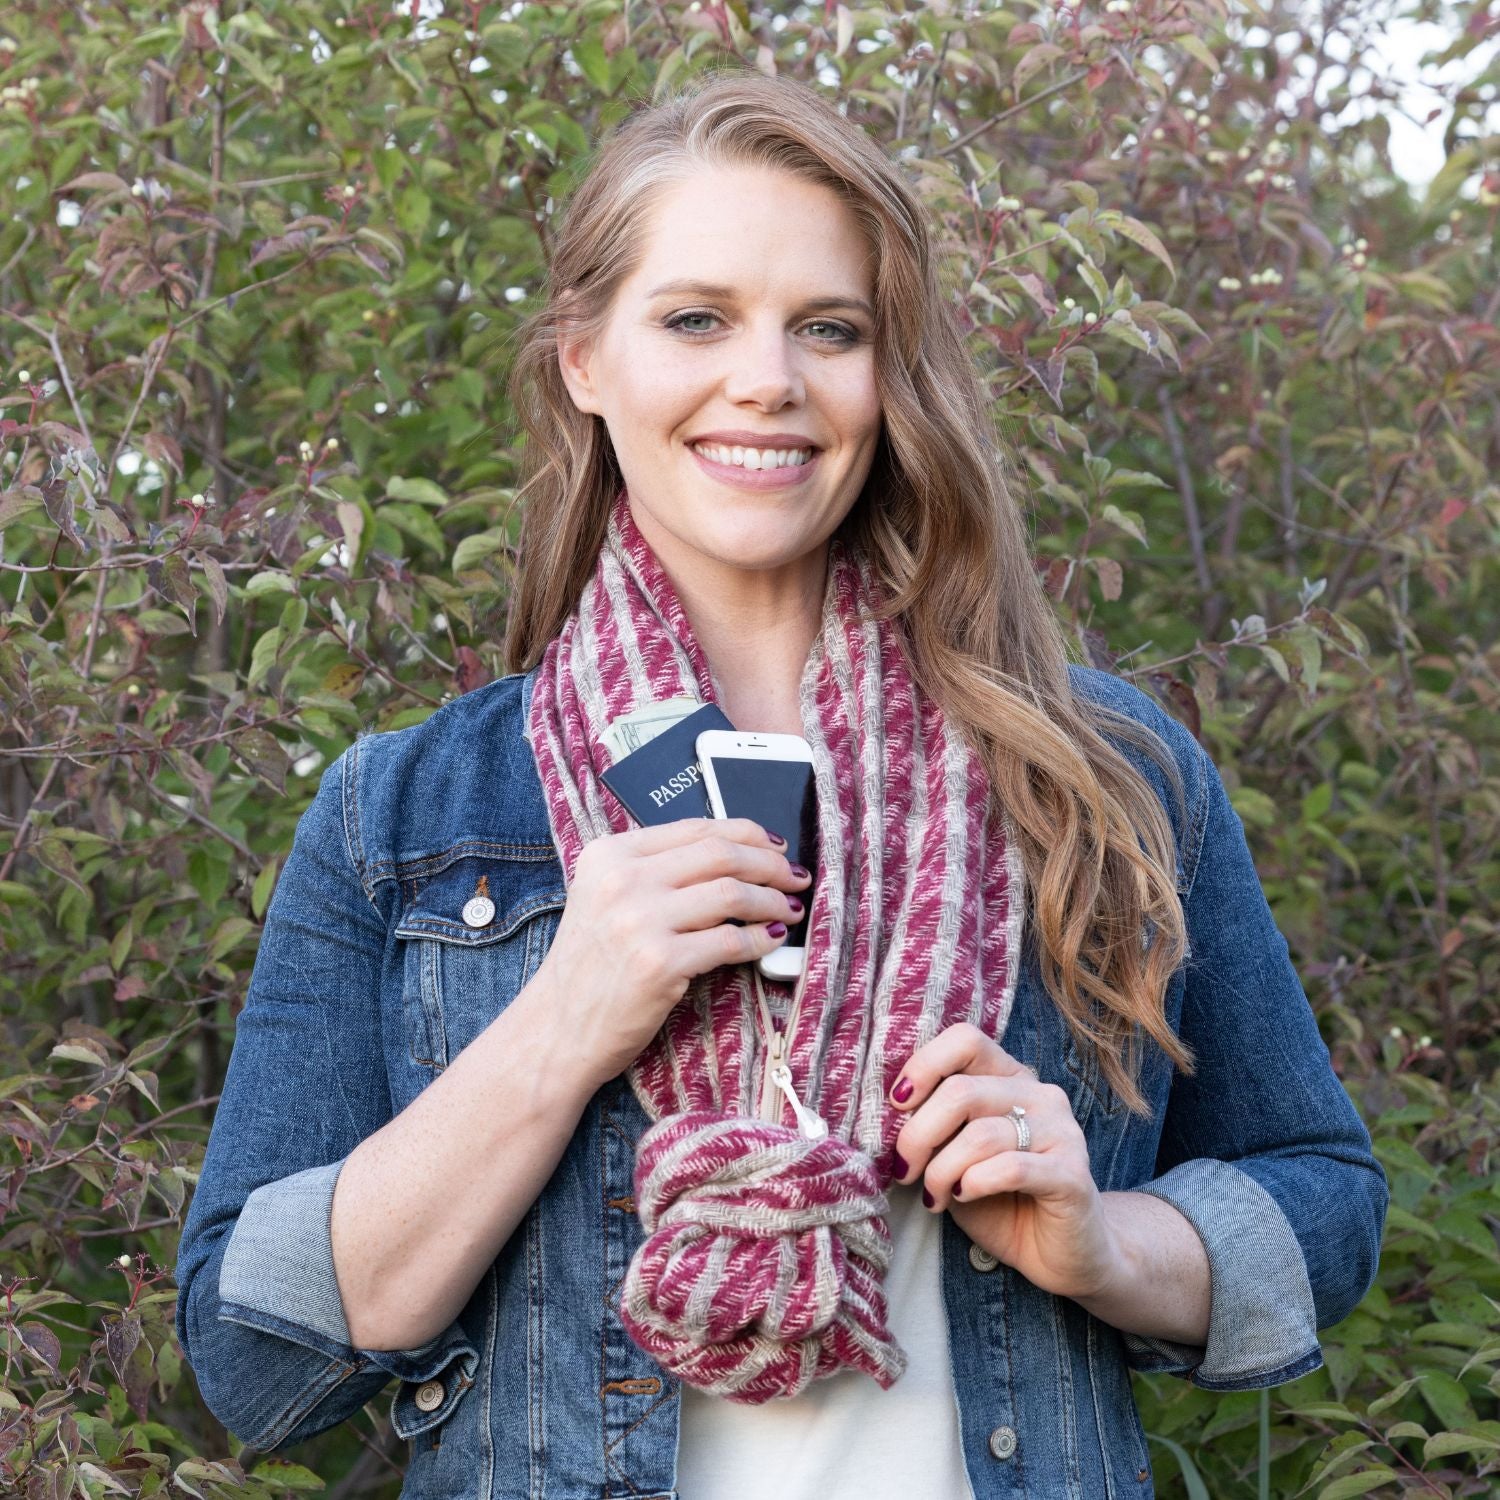 SHOLDIT Convertible Infinity Scarf with Pocket Edenburgh Burgundy knot tied in end and phone in pocket